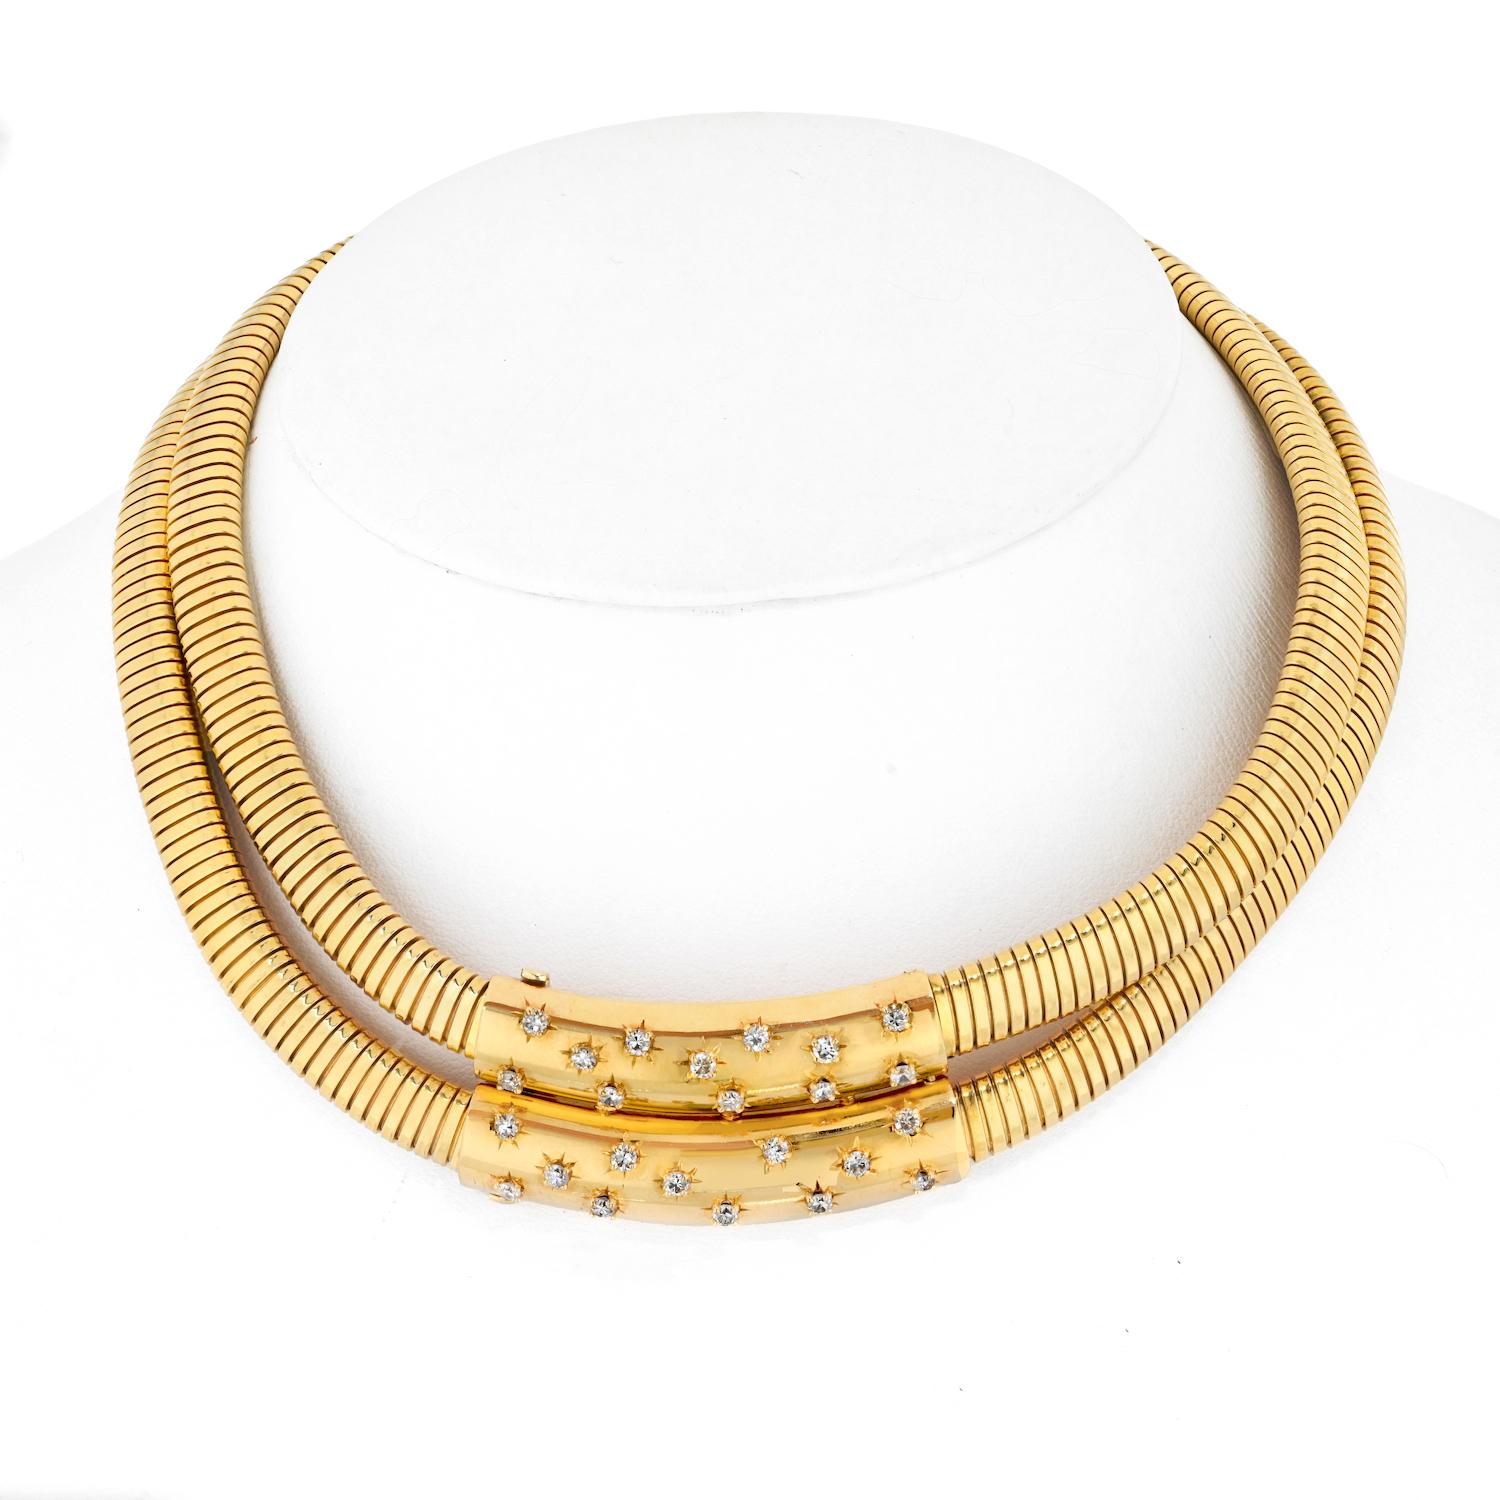 Elevate your elegance with the Van Cleef & Arpels Passe-Partout Necklace, a true masterpiece from the 1940s.

This spectacular piece features a flexible chain design, meticulously crafted in 18k yellow gold. It creates a captivating visual effect as